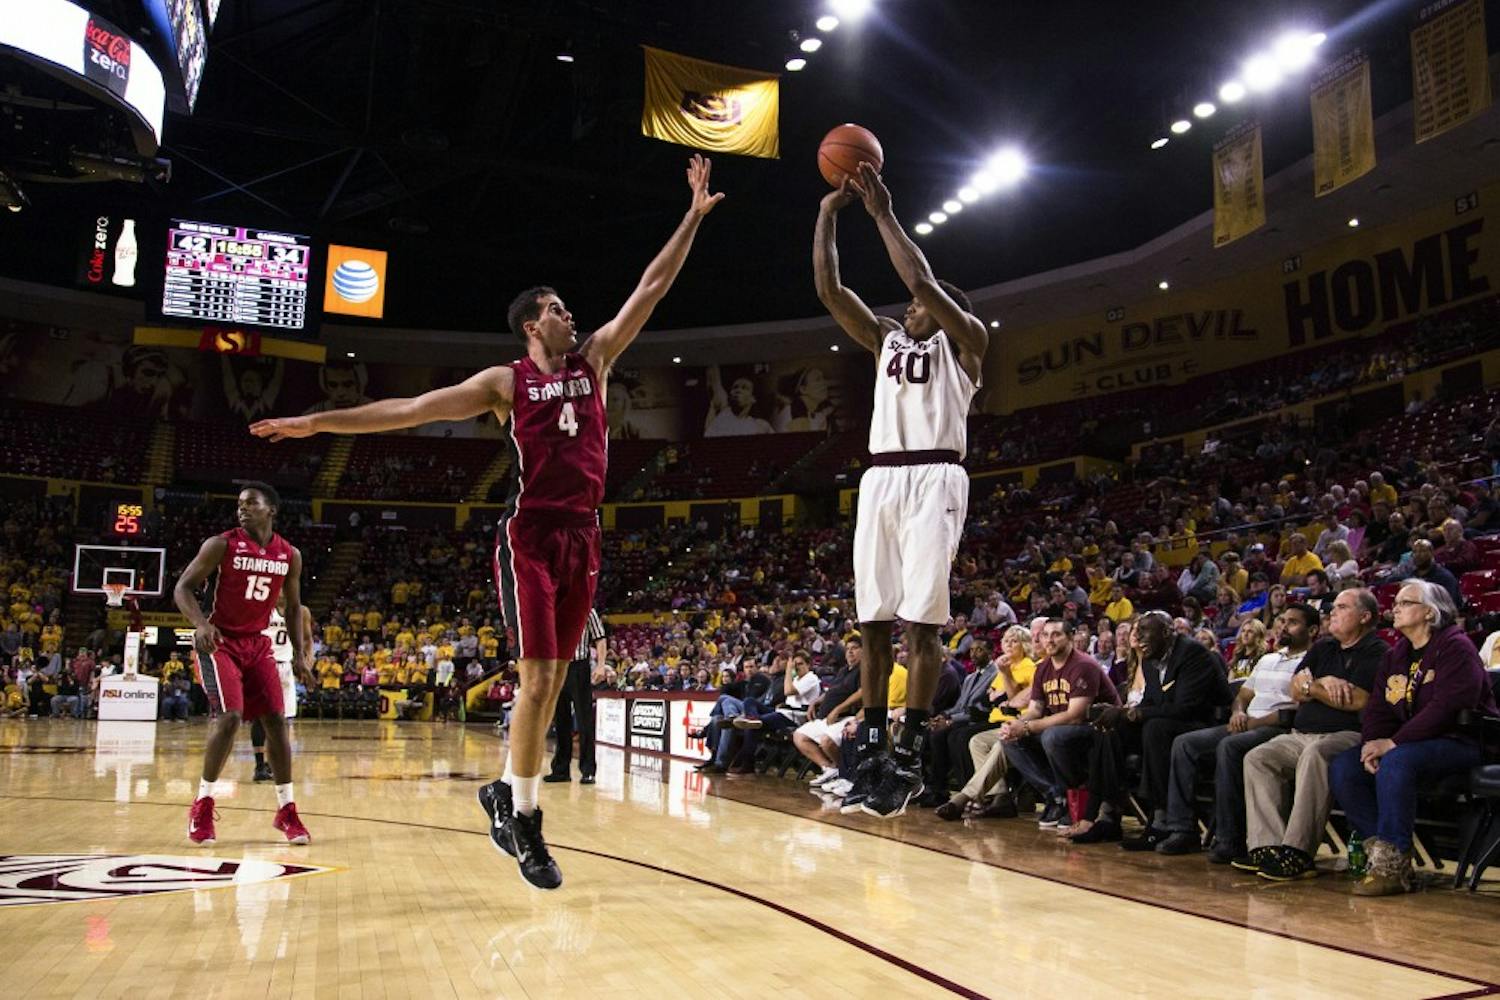 ASU senior forward Shaquielle McKissic shoots a 3-pointer against Stanford center Stefan Nastic at the ASU vs. Stanford basketball game at the Wells Fargo Arena on March 5, 2015. McKissic would drain the 3-pointer and had a team leading 23 points. (Daniel Kwon/The State Press)